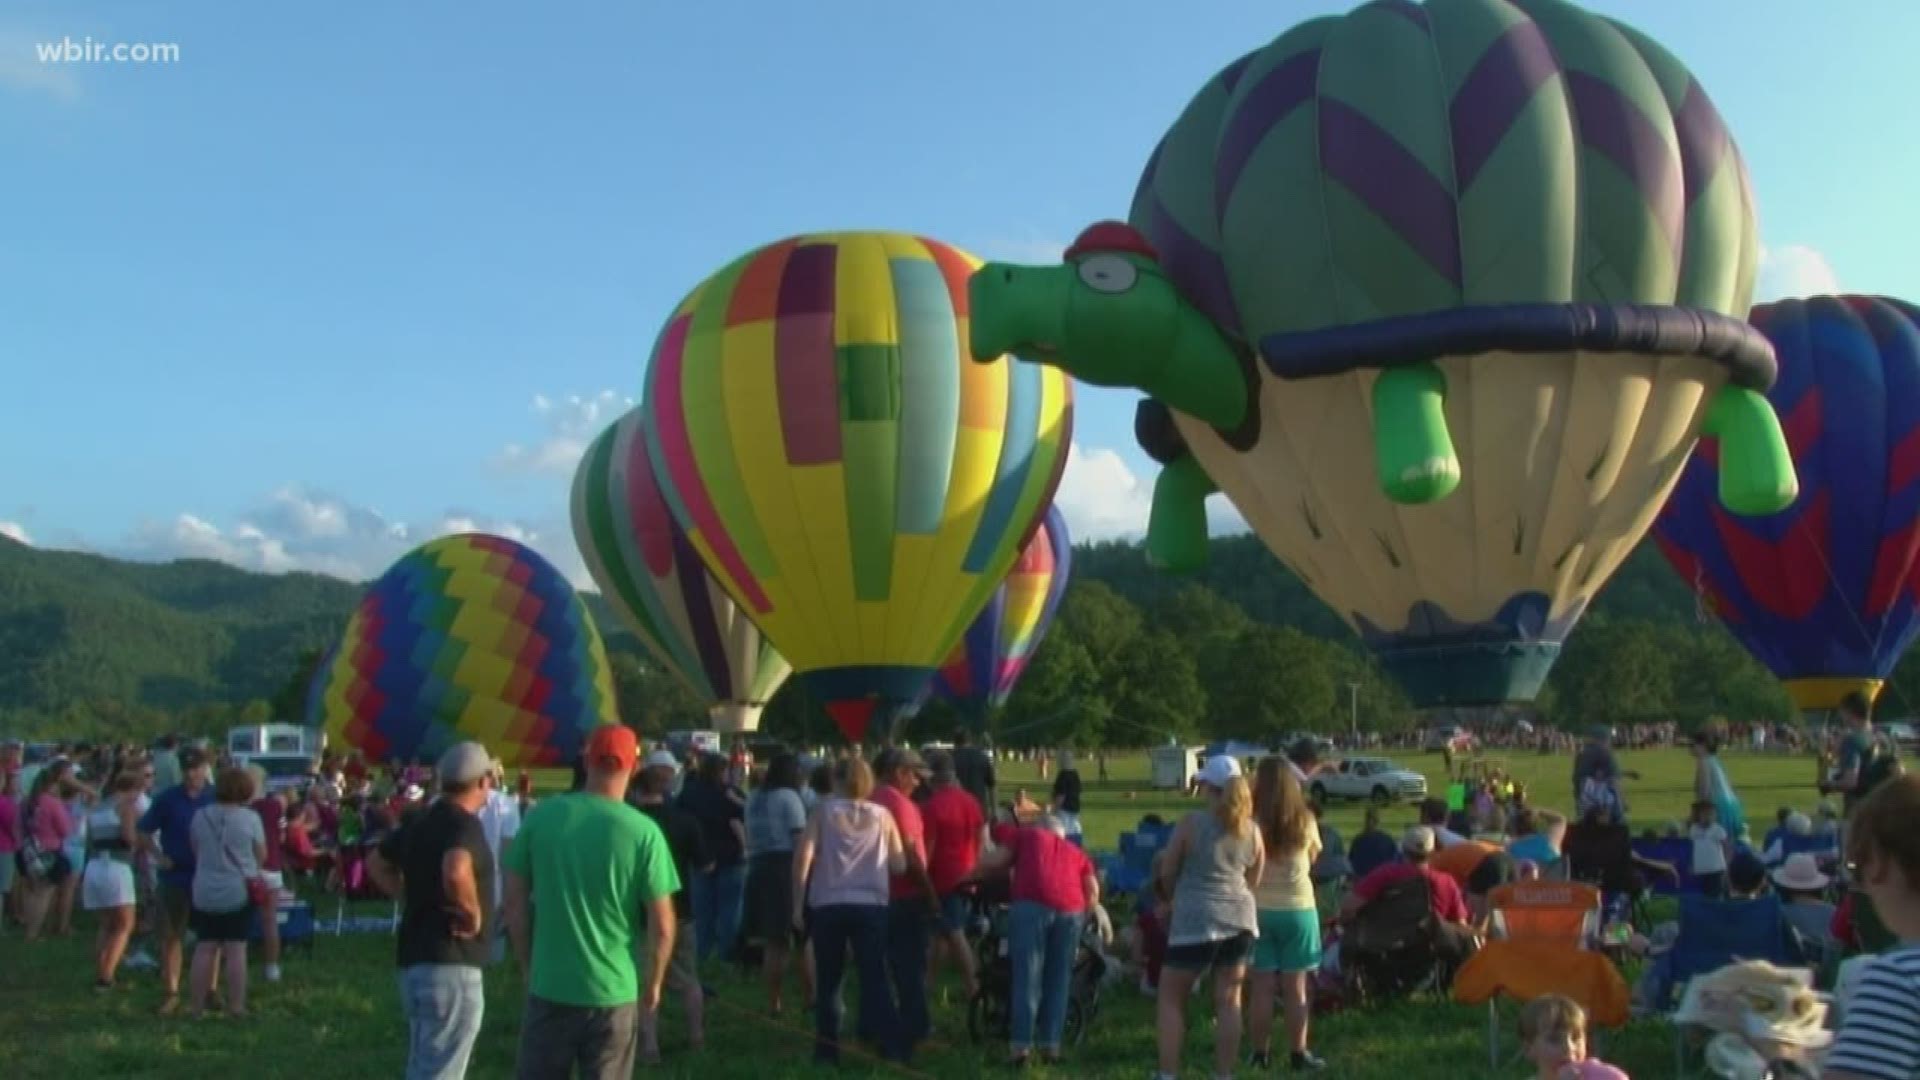 From a music festival to a hot air balloon festival, there's a lot going on this weekend.